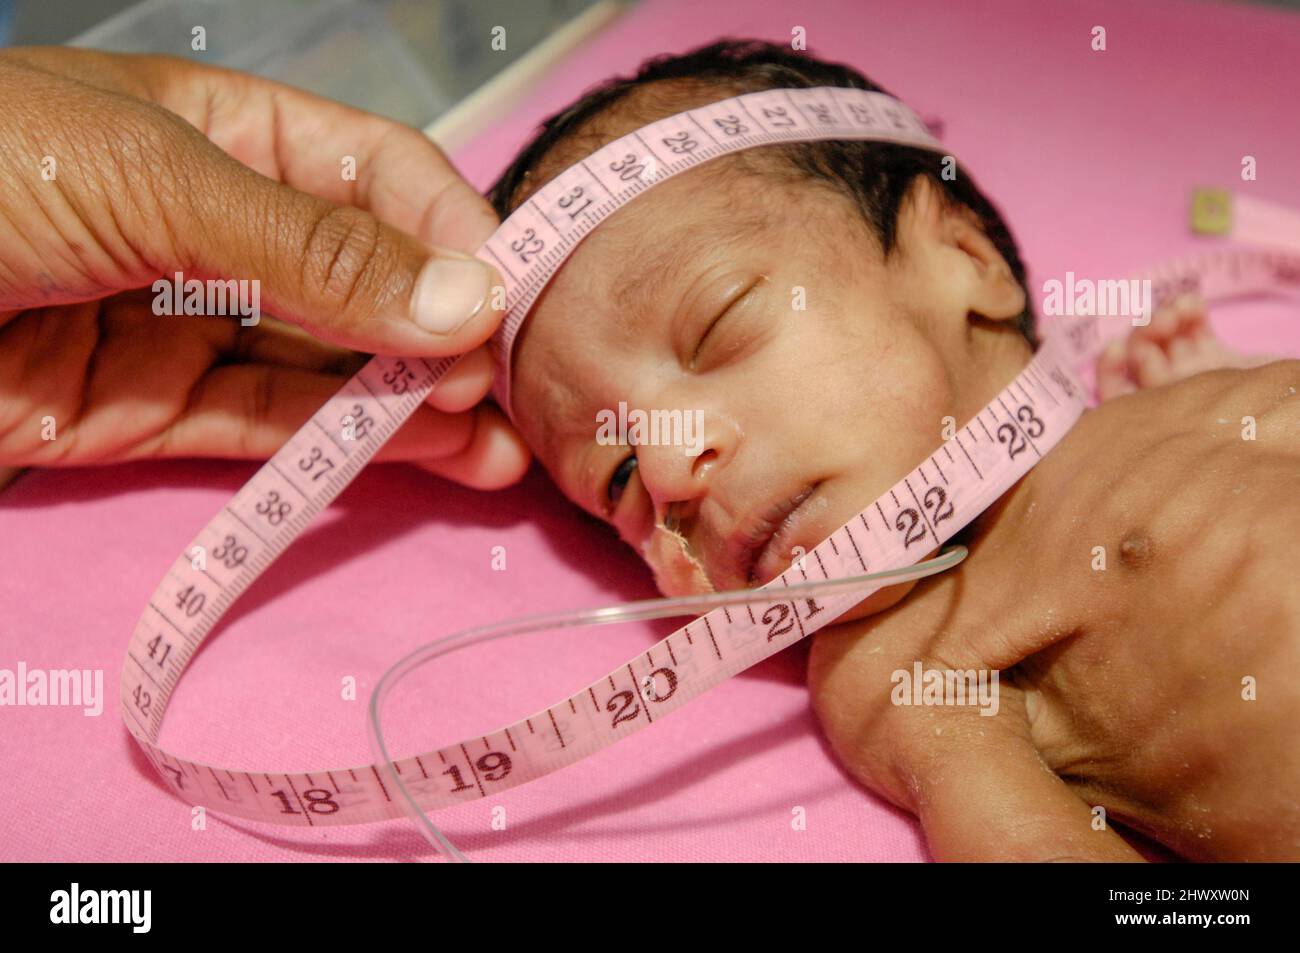 A neonatal nurse measure's the head of a premature baby to make record of growth progress, as part of her examination. Stock Photo